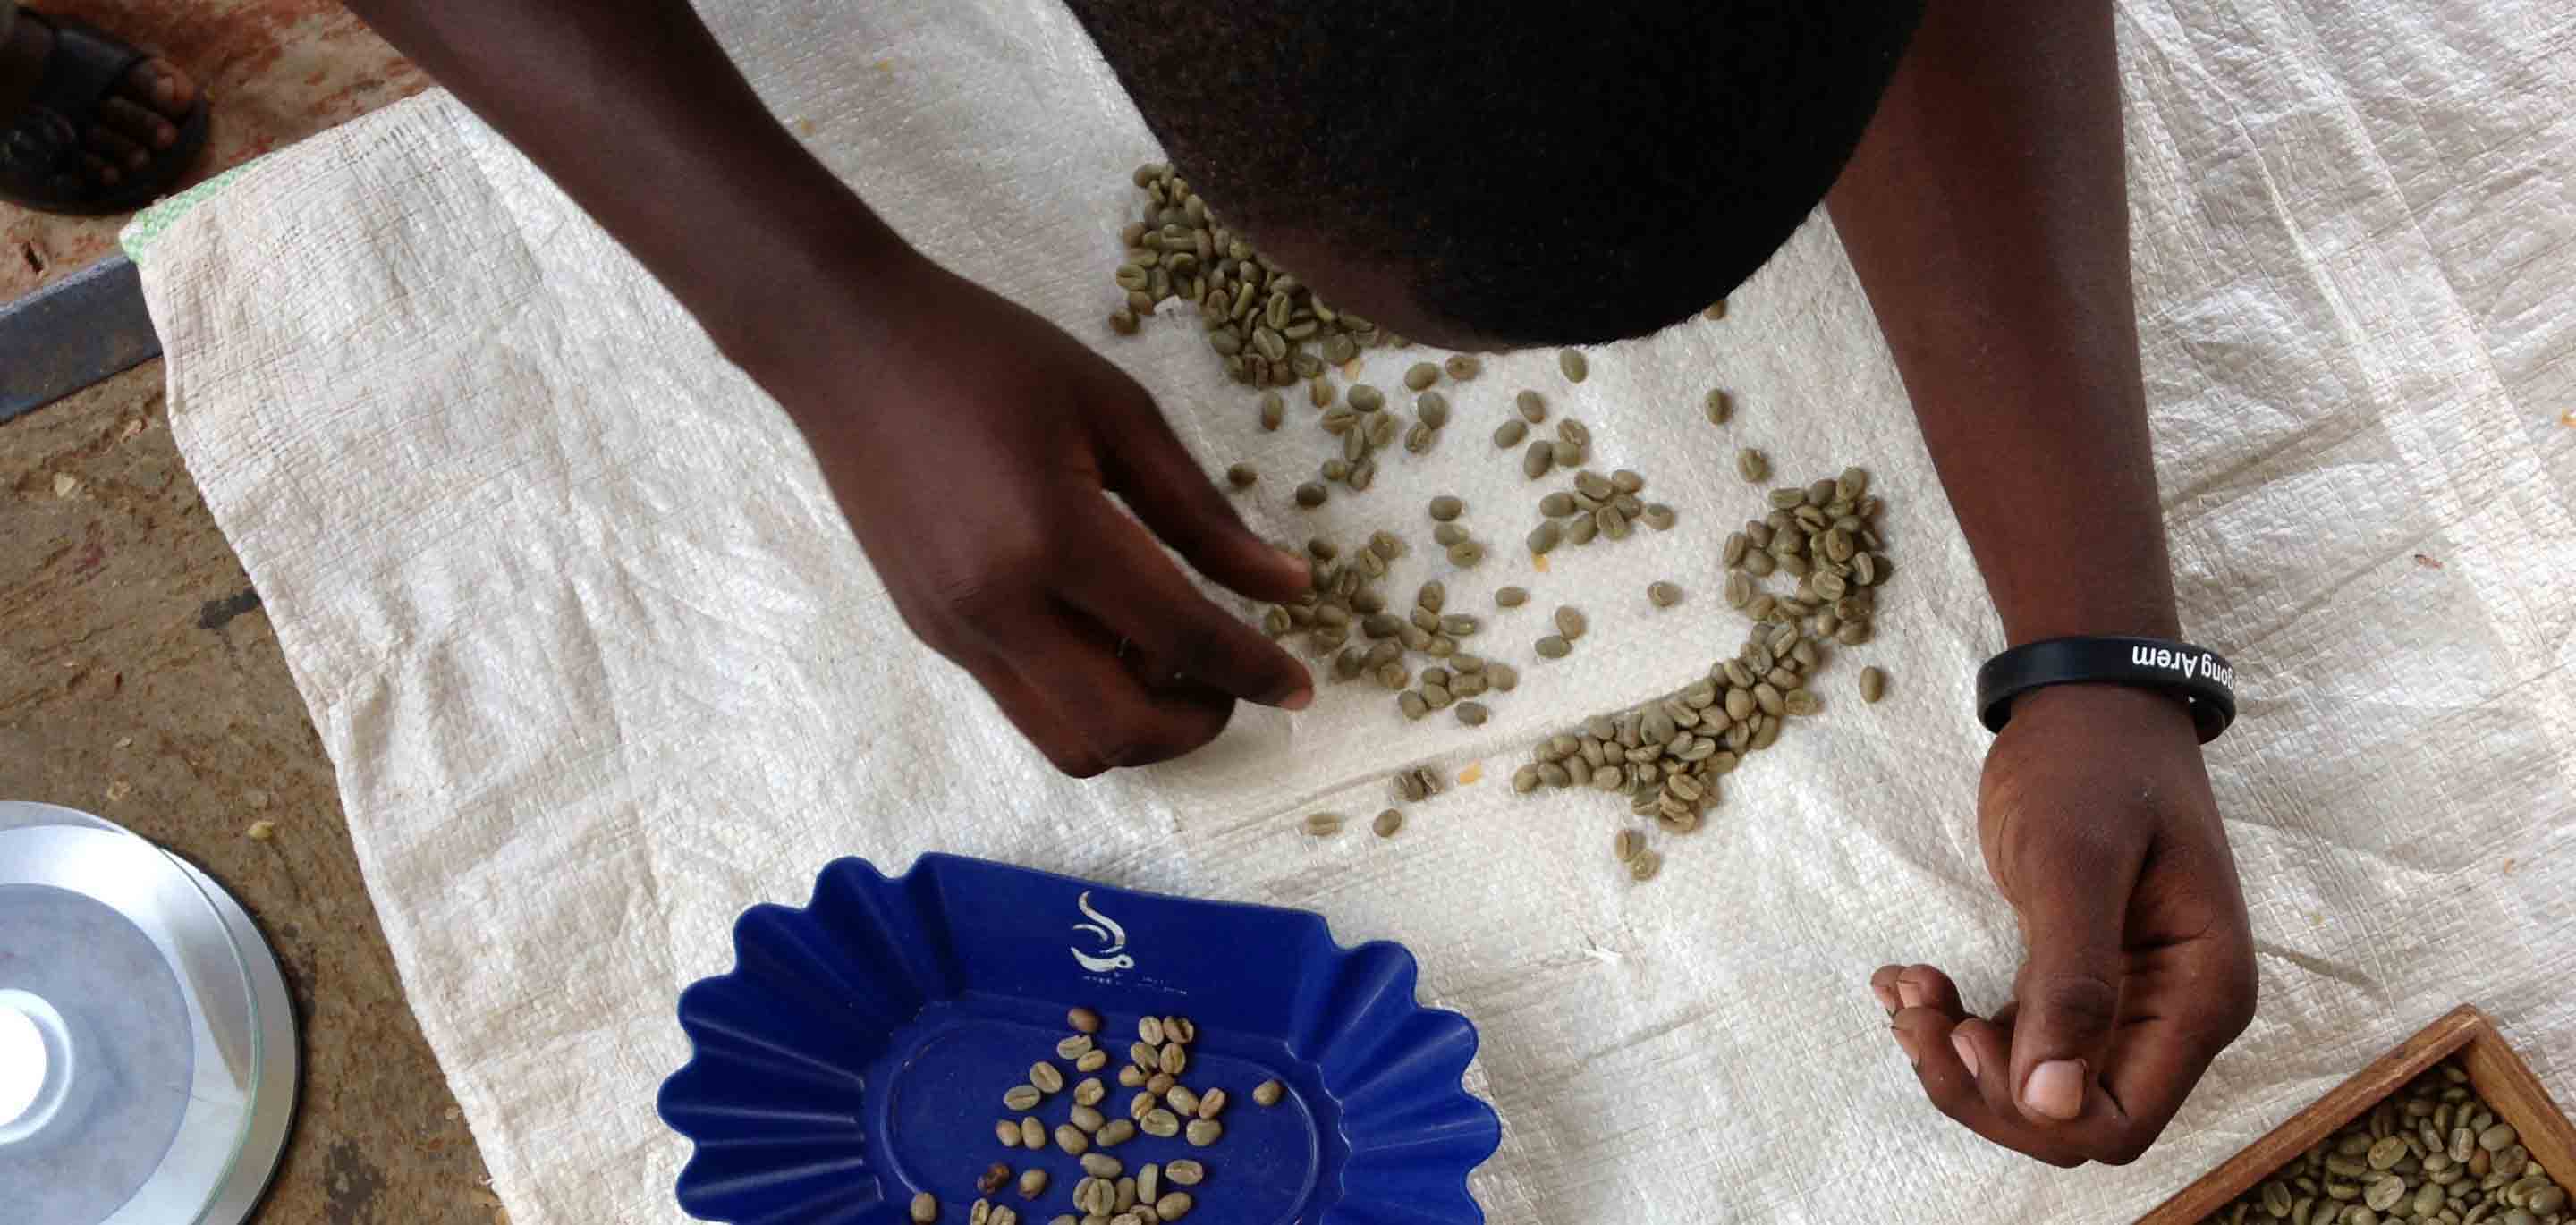 Green Ugandan coffee beans being sorted on a white sack and put into a blue tray